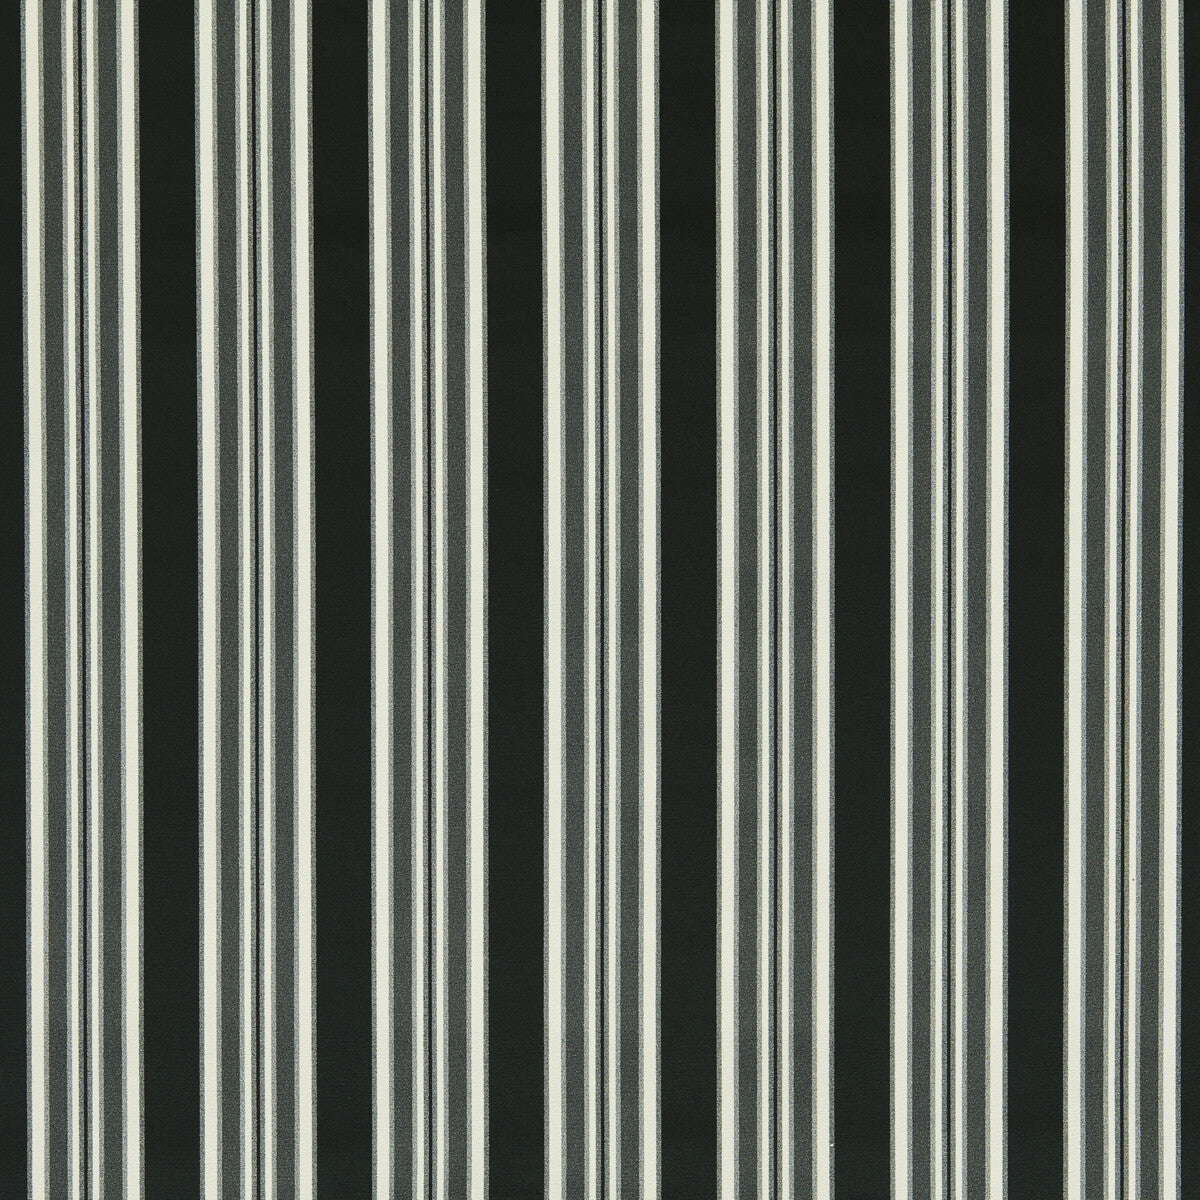 Wilmott fabric in ebony color - pattern F1691/03.CAC.0 - by Clarke And Clarke in the Whitworth collection